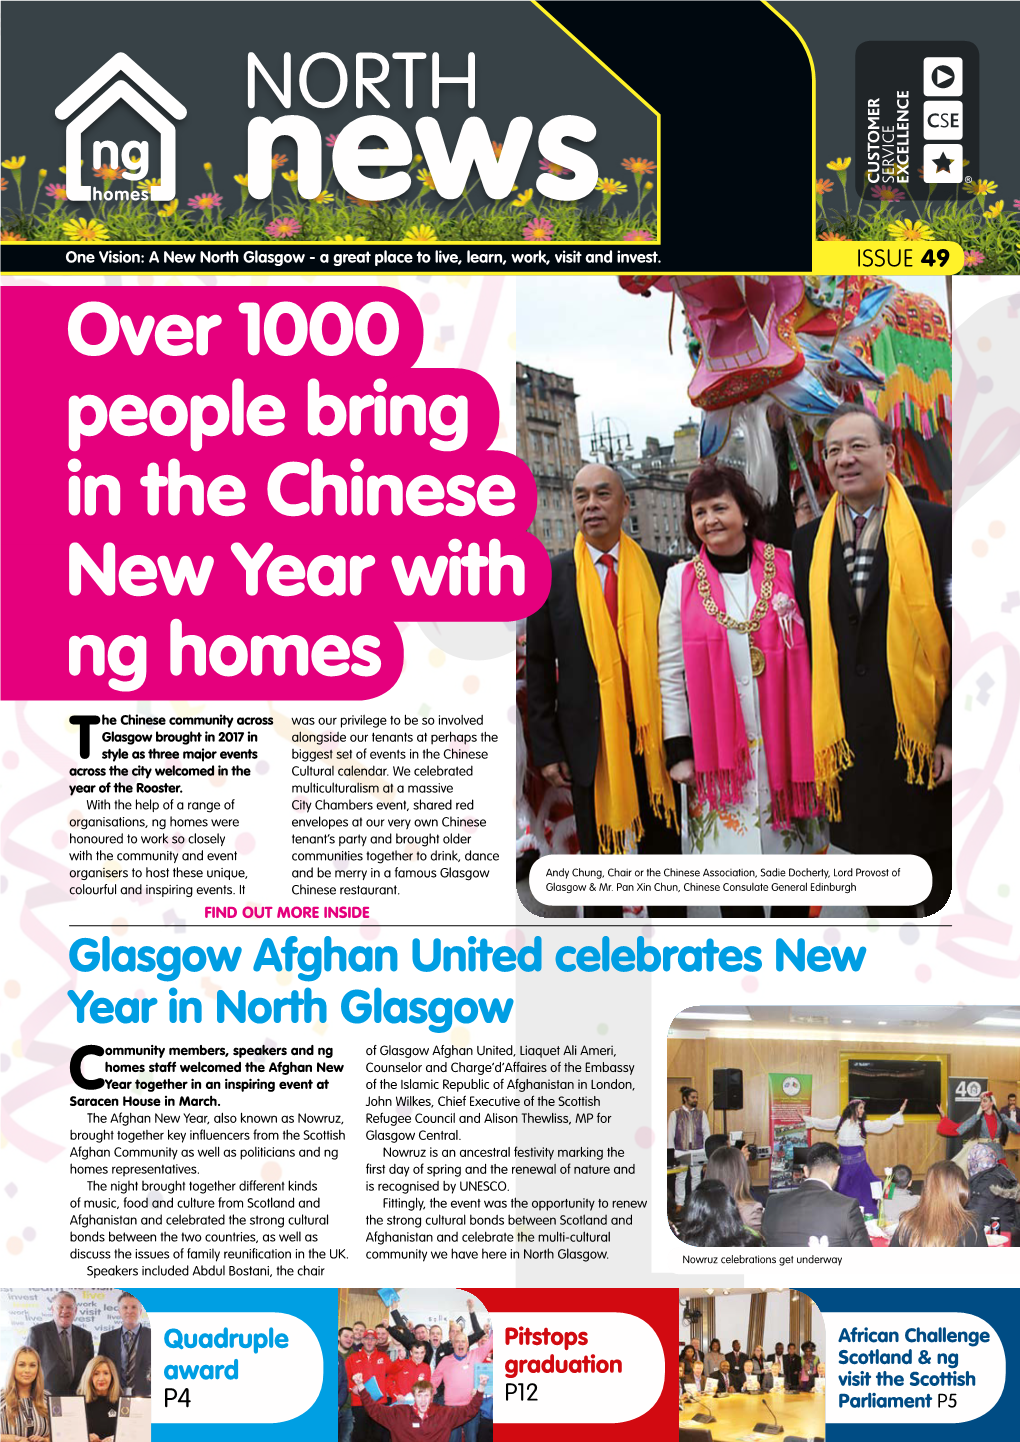 Over 1000 People Bring in the Chinese New Year with Ng Homes